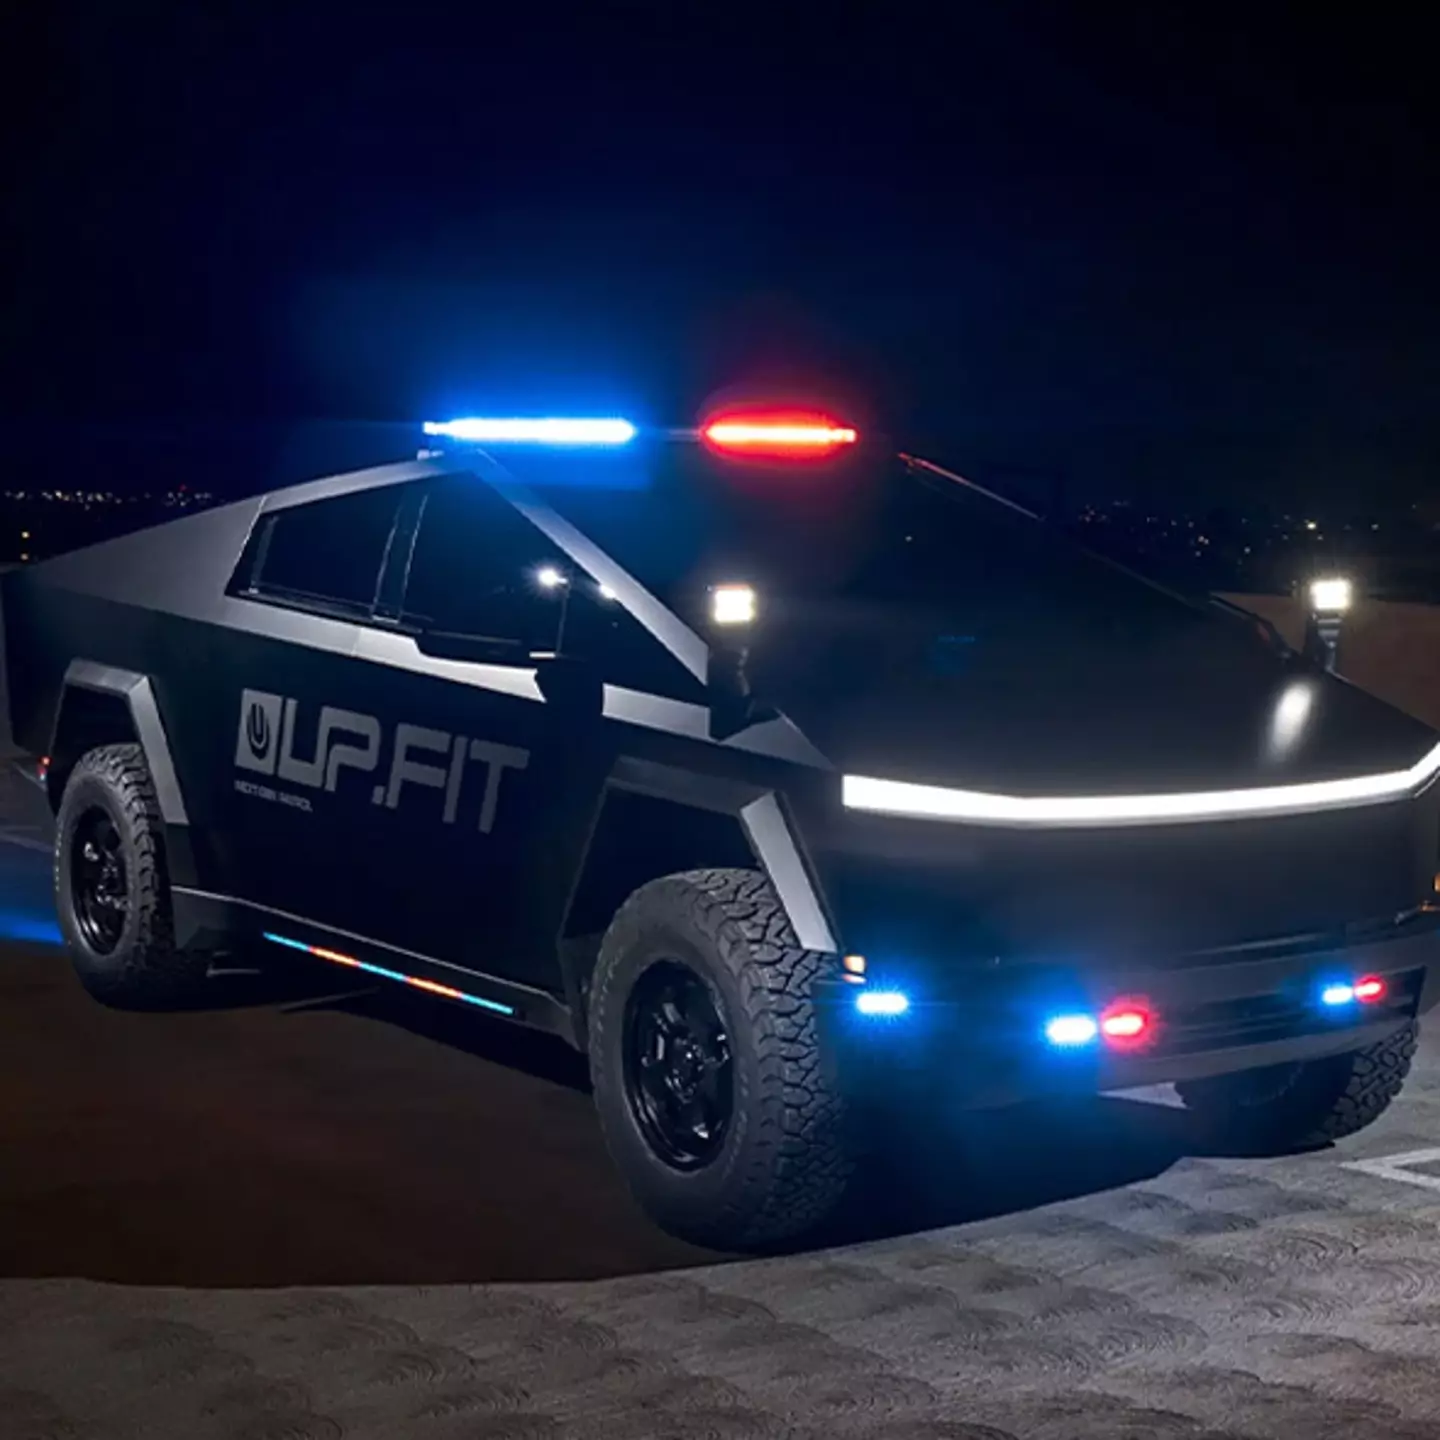 The world's first Police Cybertruck is now ready for patrol and people are divided